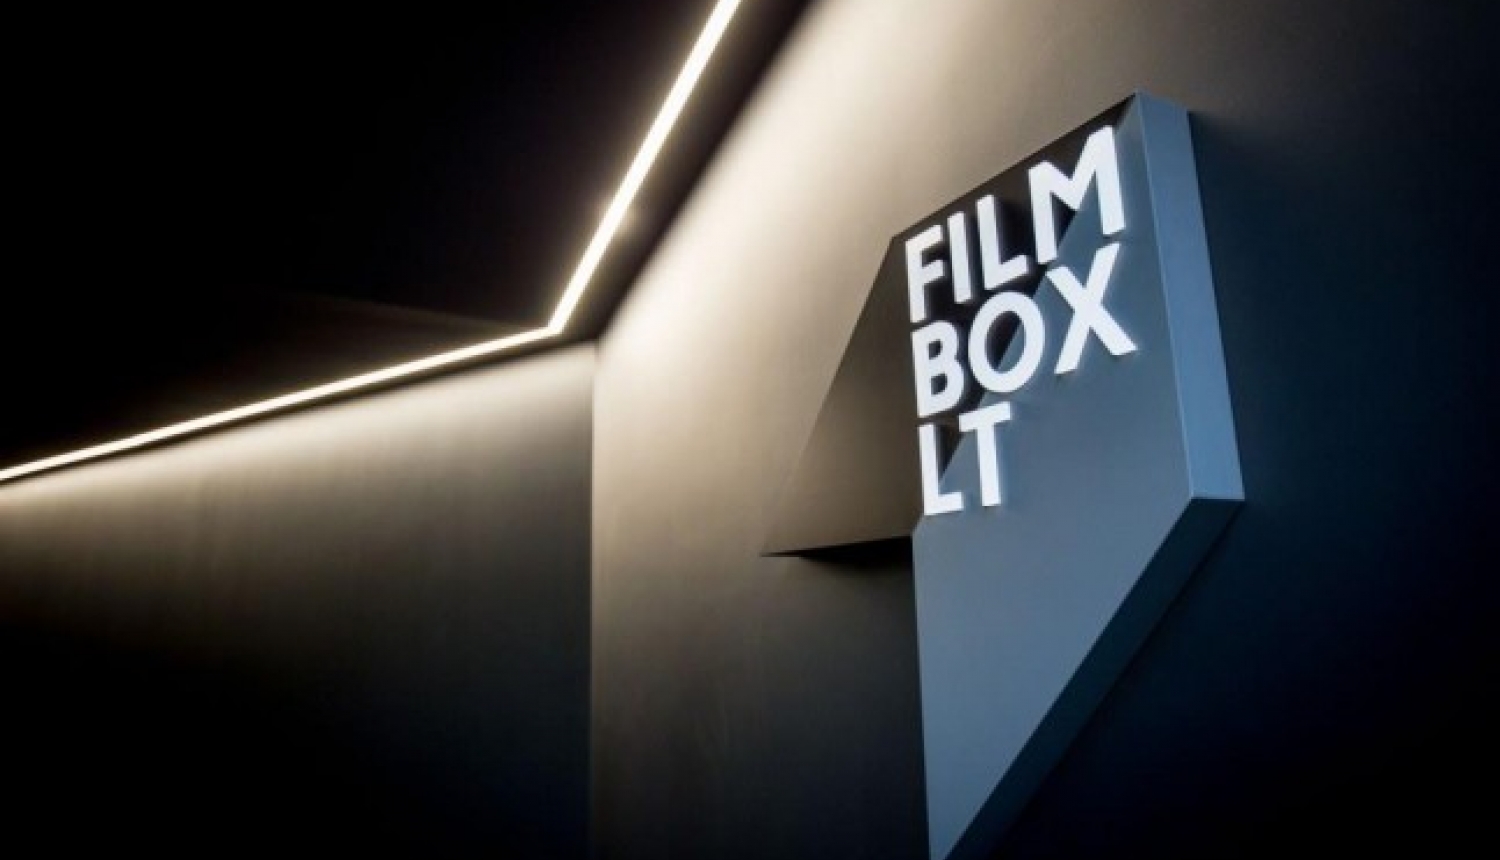 October – the month of Latvian films at the Film Box LT